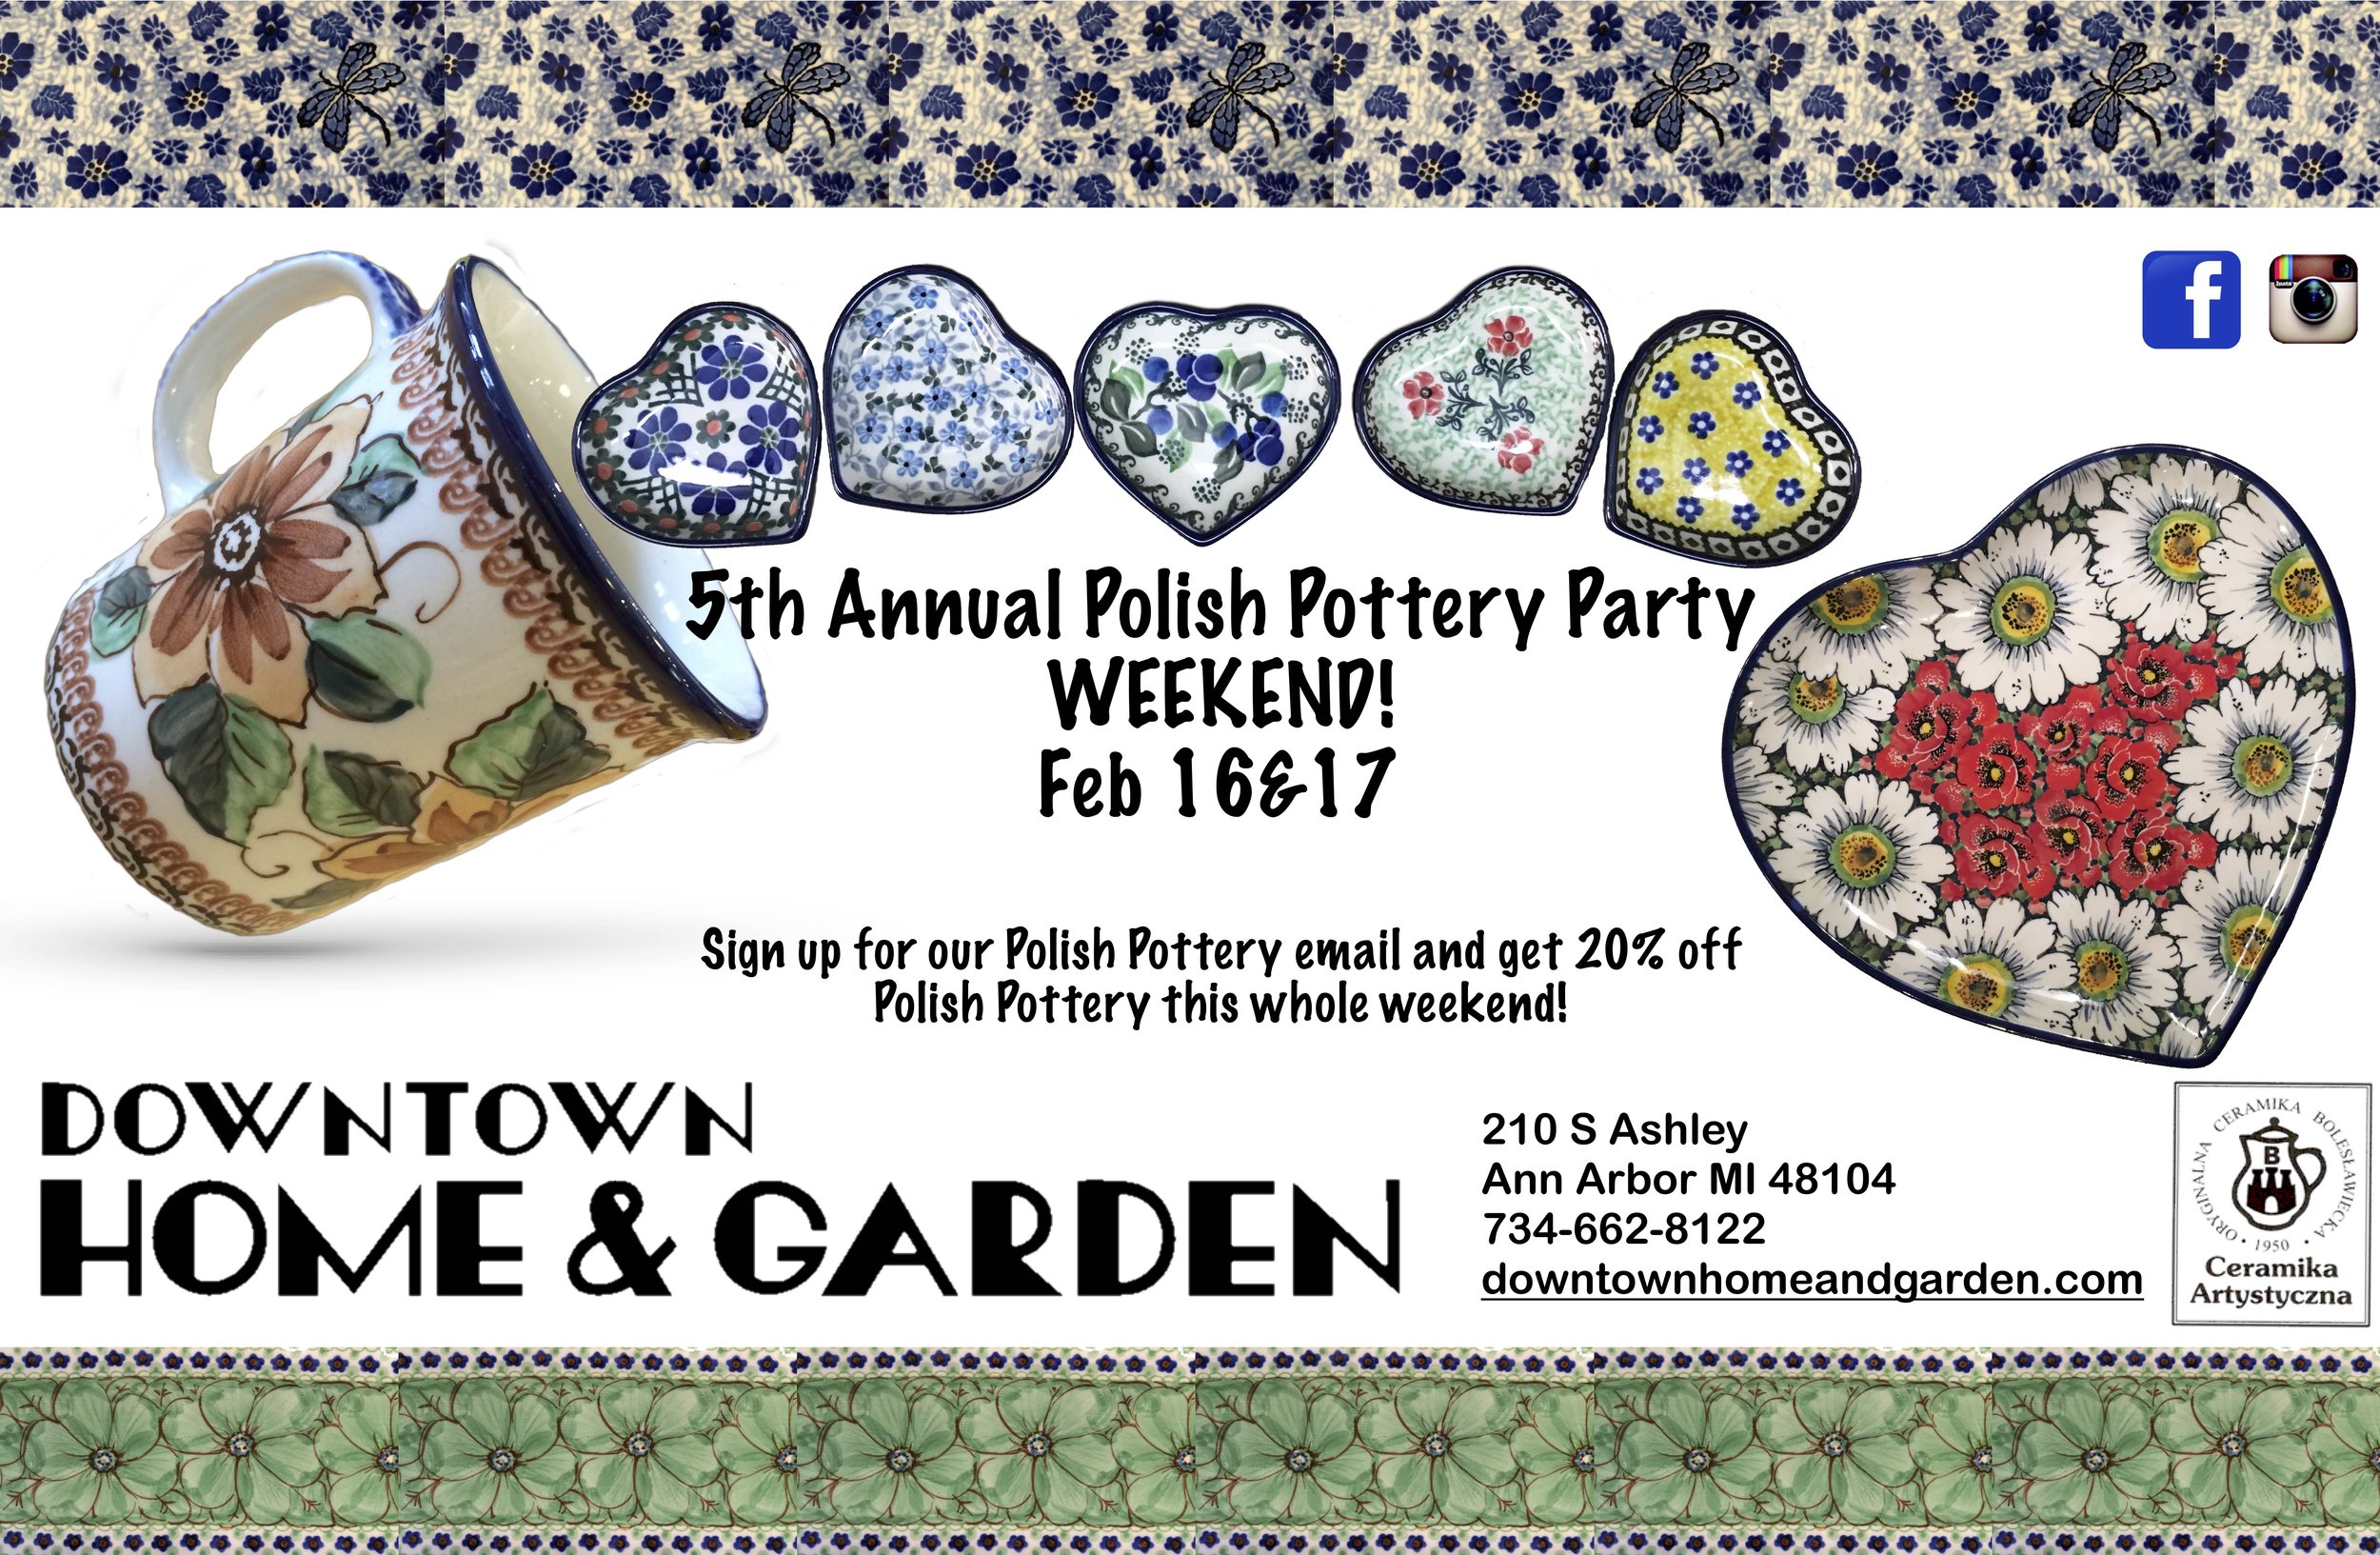 5th Annual Polish Pottery Party Weekend Downtown Home Garden